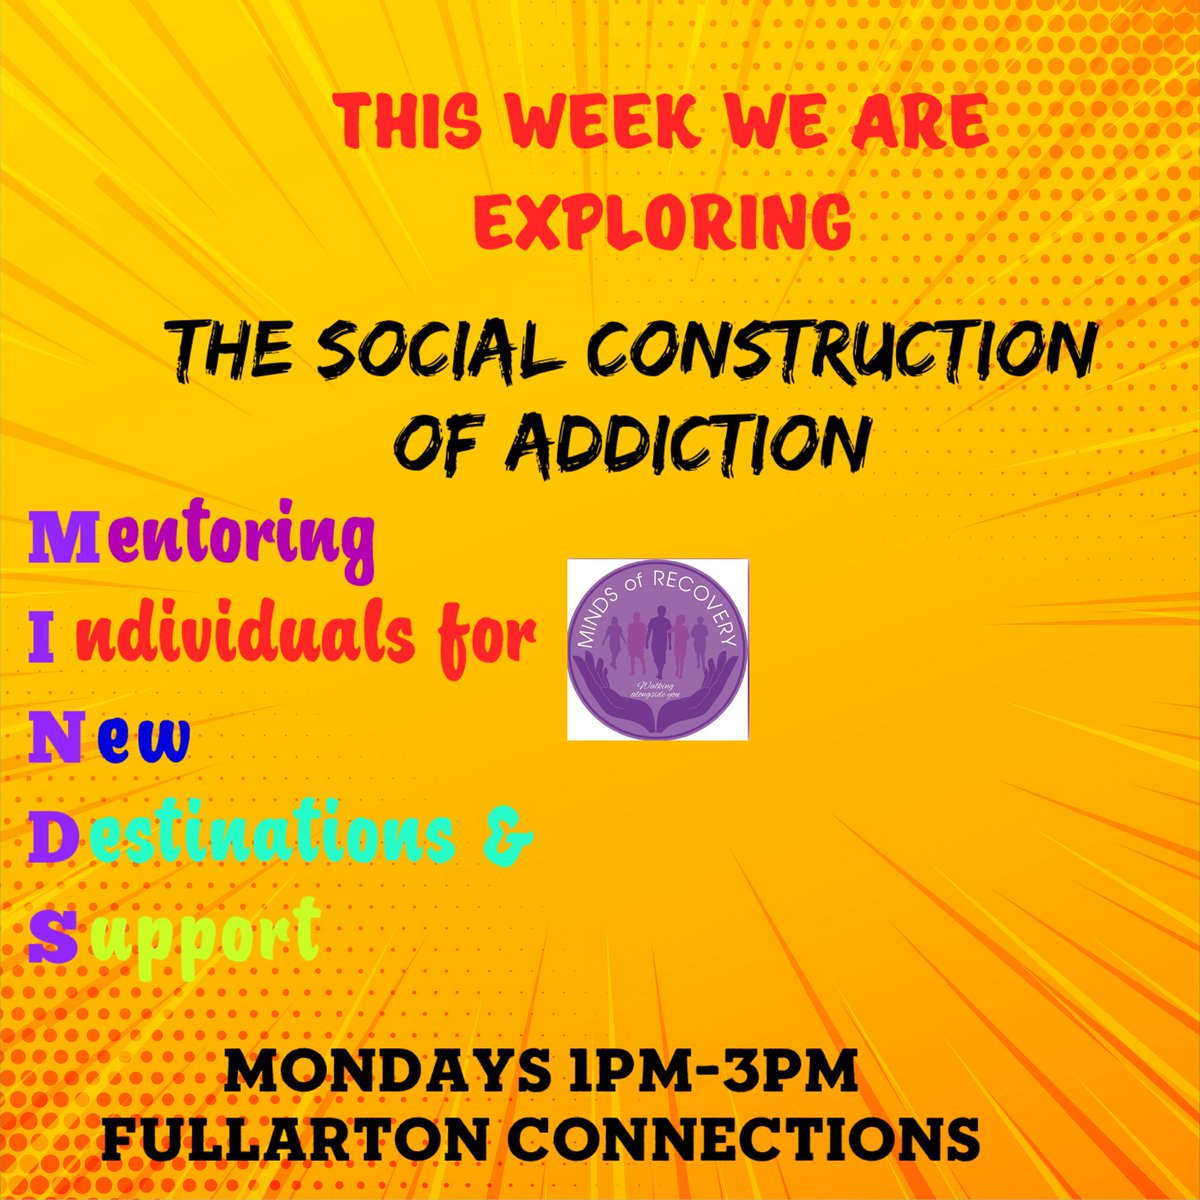 MINDS conversation cafe focus tomorrow is exploring how addiction is socially constructed , and what influences it? #changethenarrative